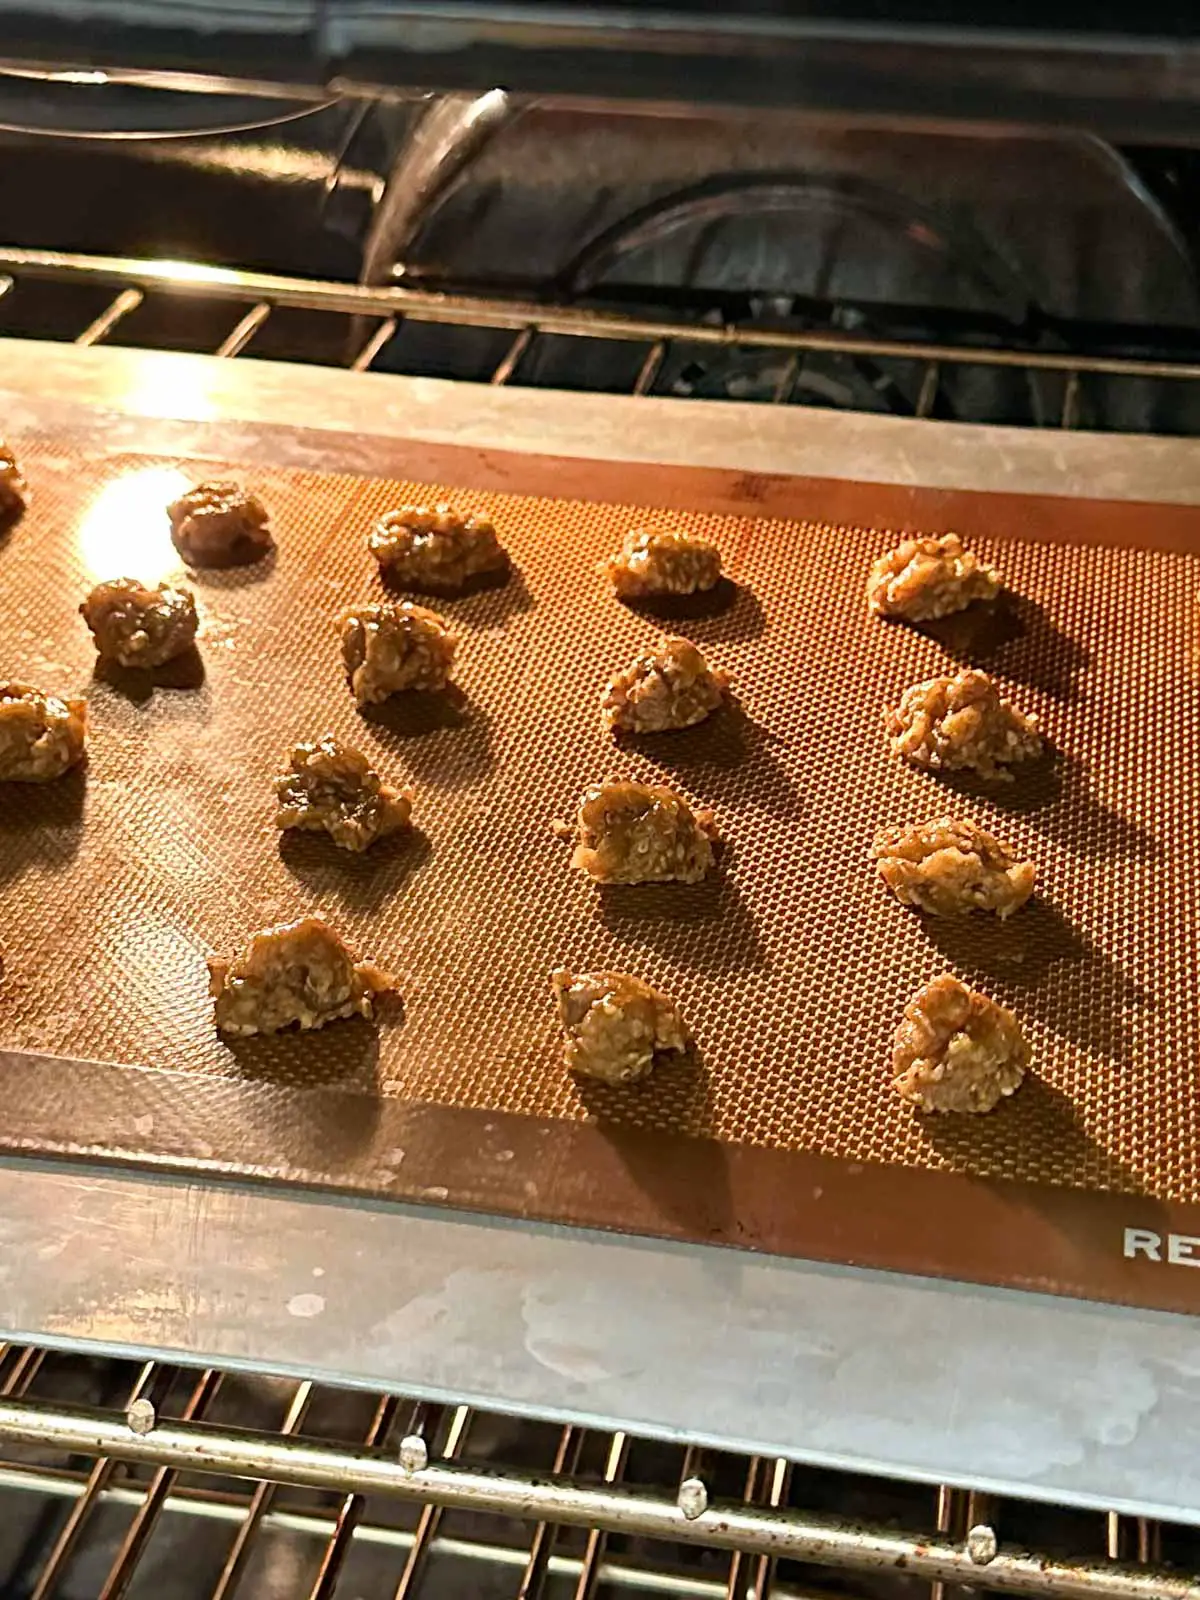 Benne wafers baking on a silicone baking mat on top of a baking tray in the oven.